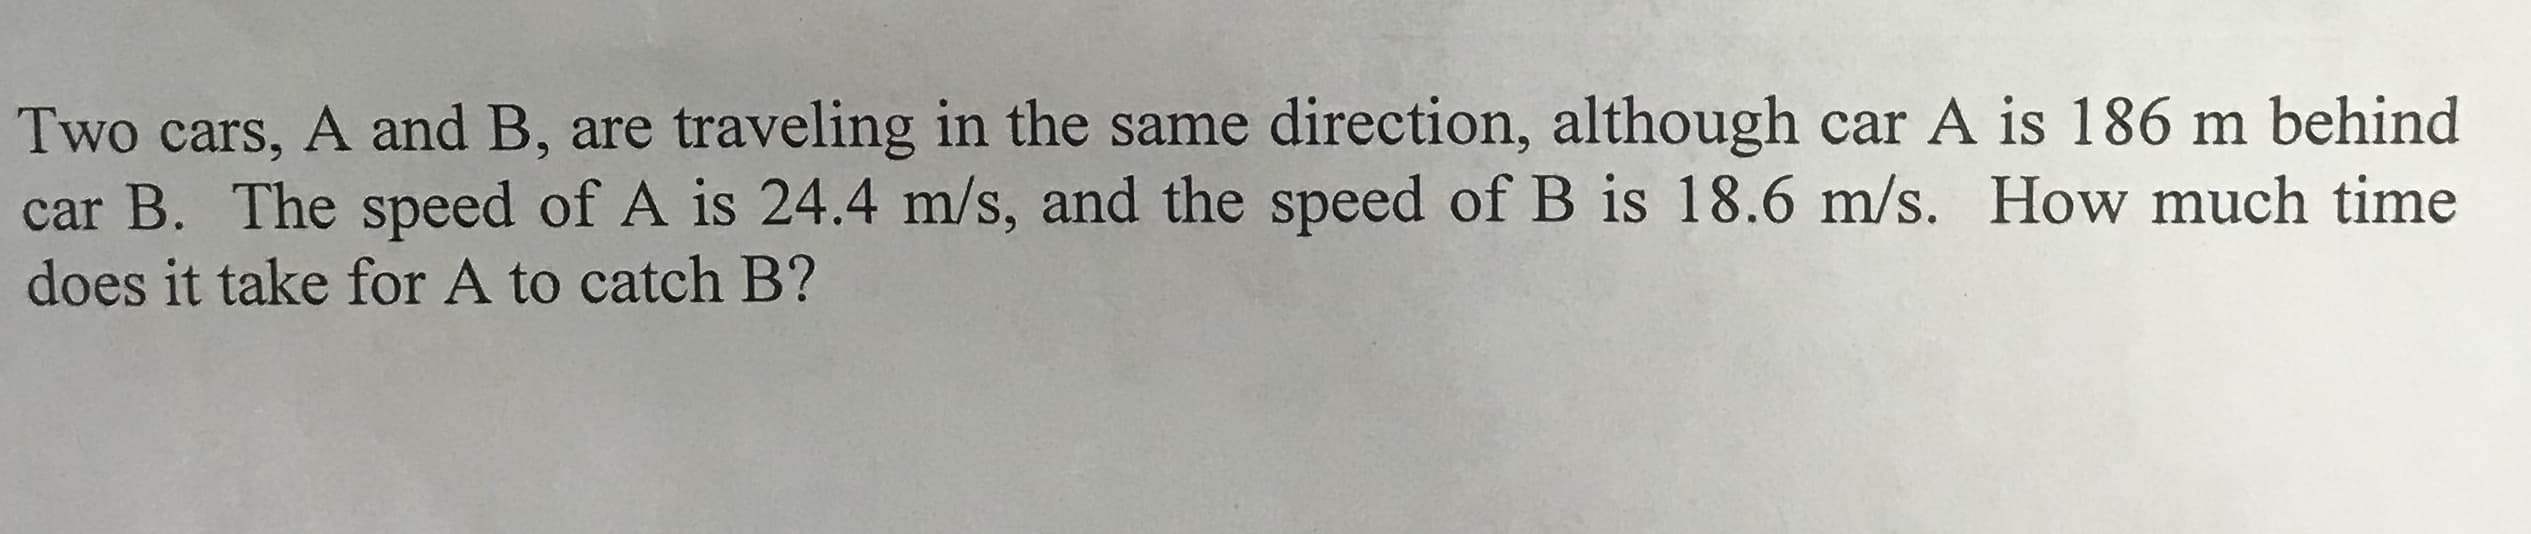 Two cars, A and B, are traveling in the same direction, although car A is 186 m behind
car B. The speed of A is 24.4 m/s, and the speed of B is 18.6 m/s. How much time
does it take for A to catch B?
